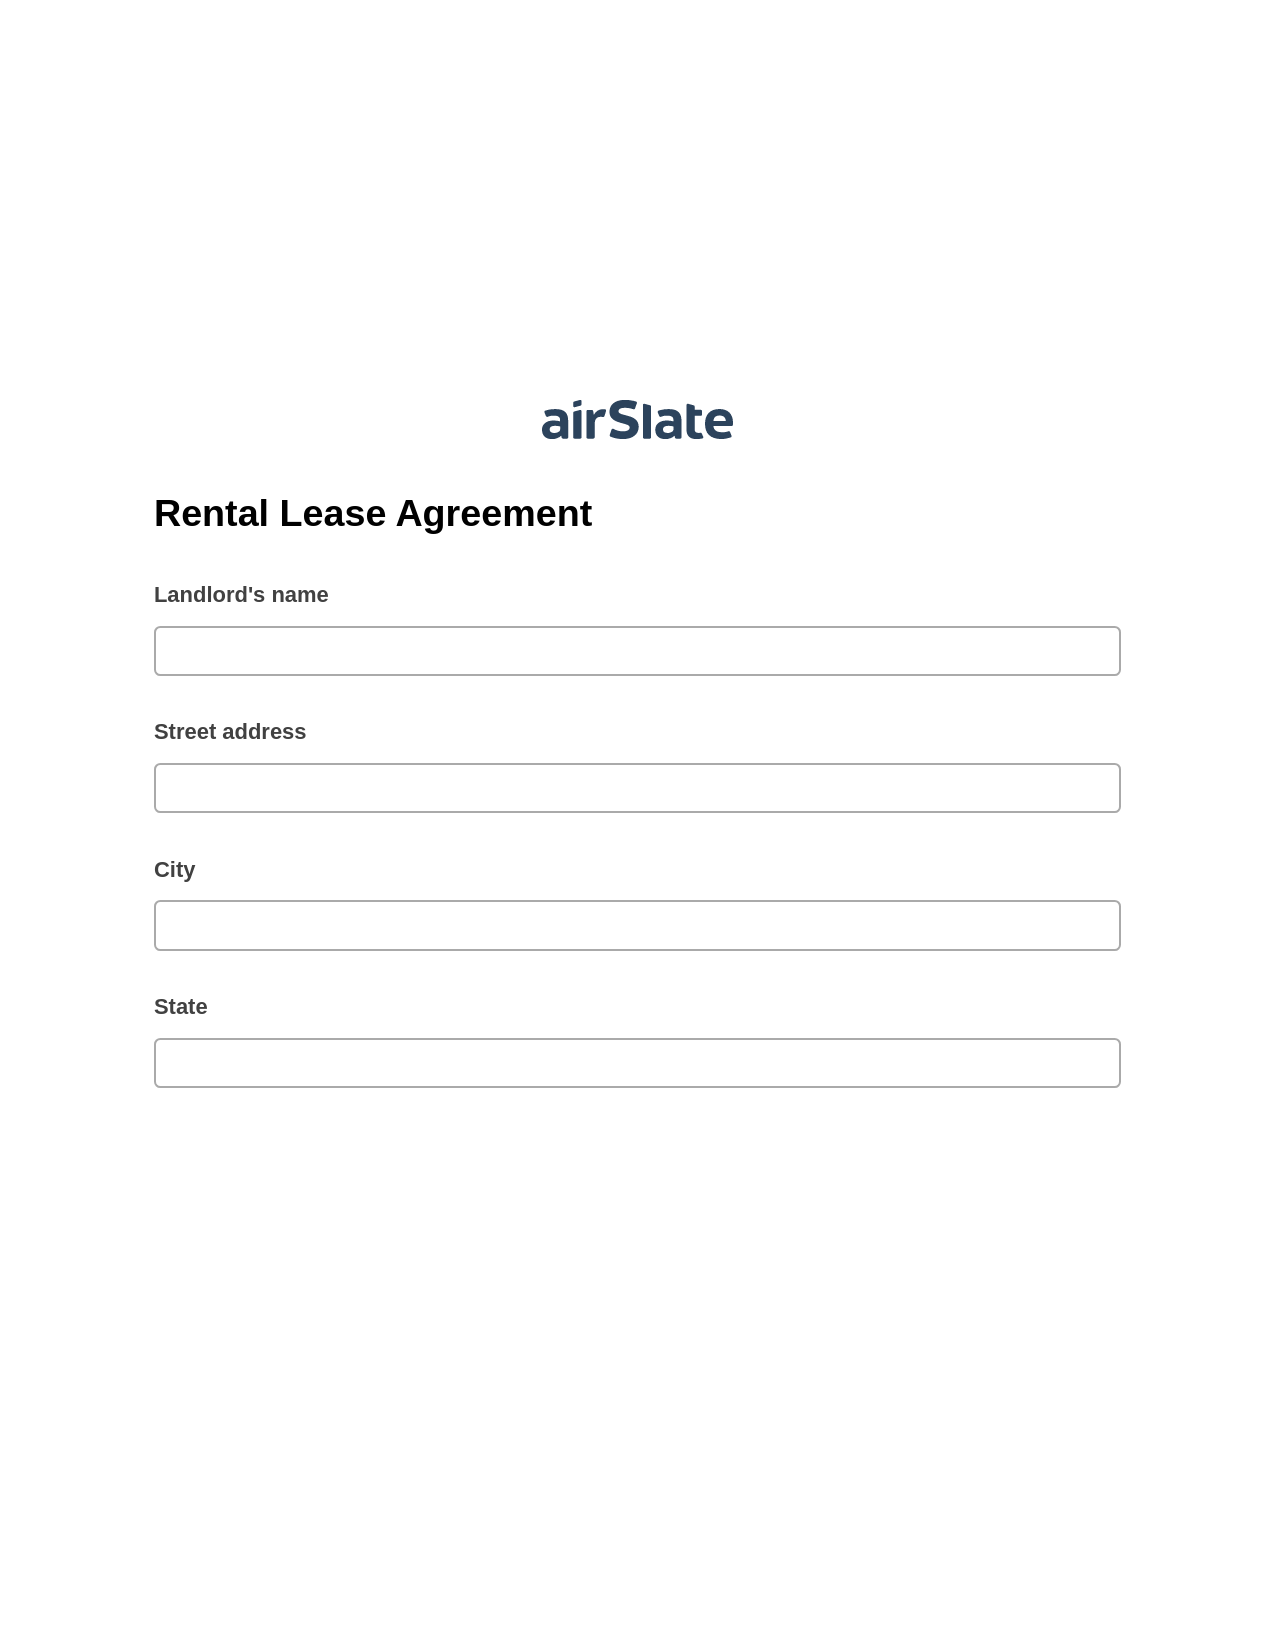 Multirole Rental Lease Agreement System Bot - Slack Two-Way Binding Bot, Create NetSuite Records Bot, Export to Excel 365 Bot